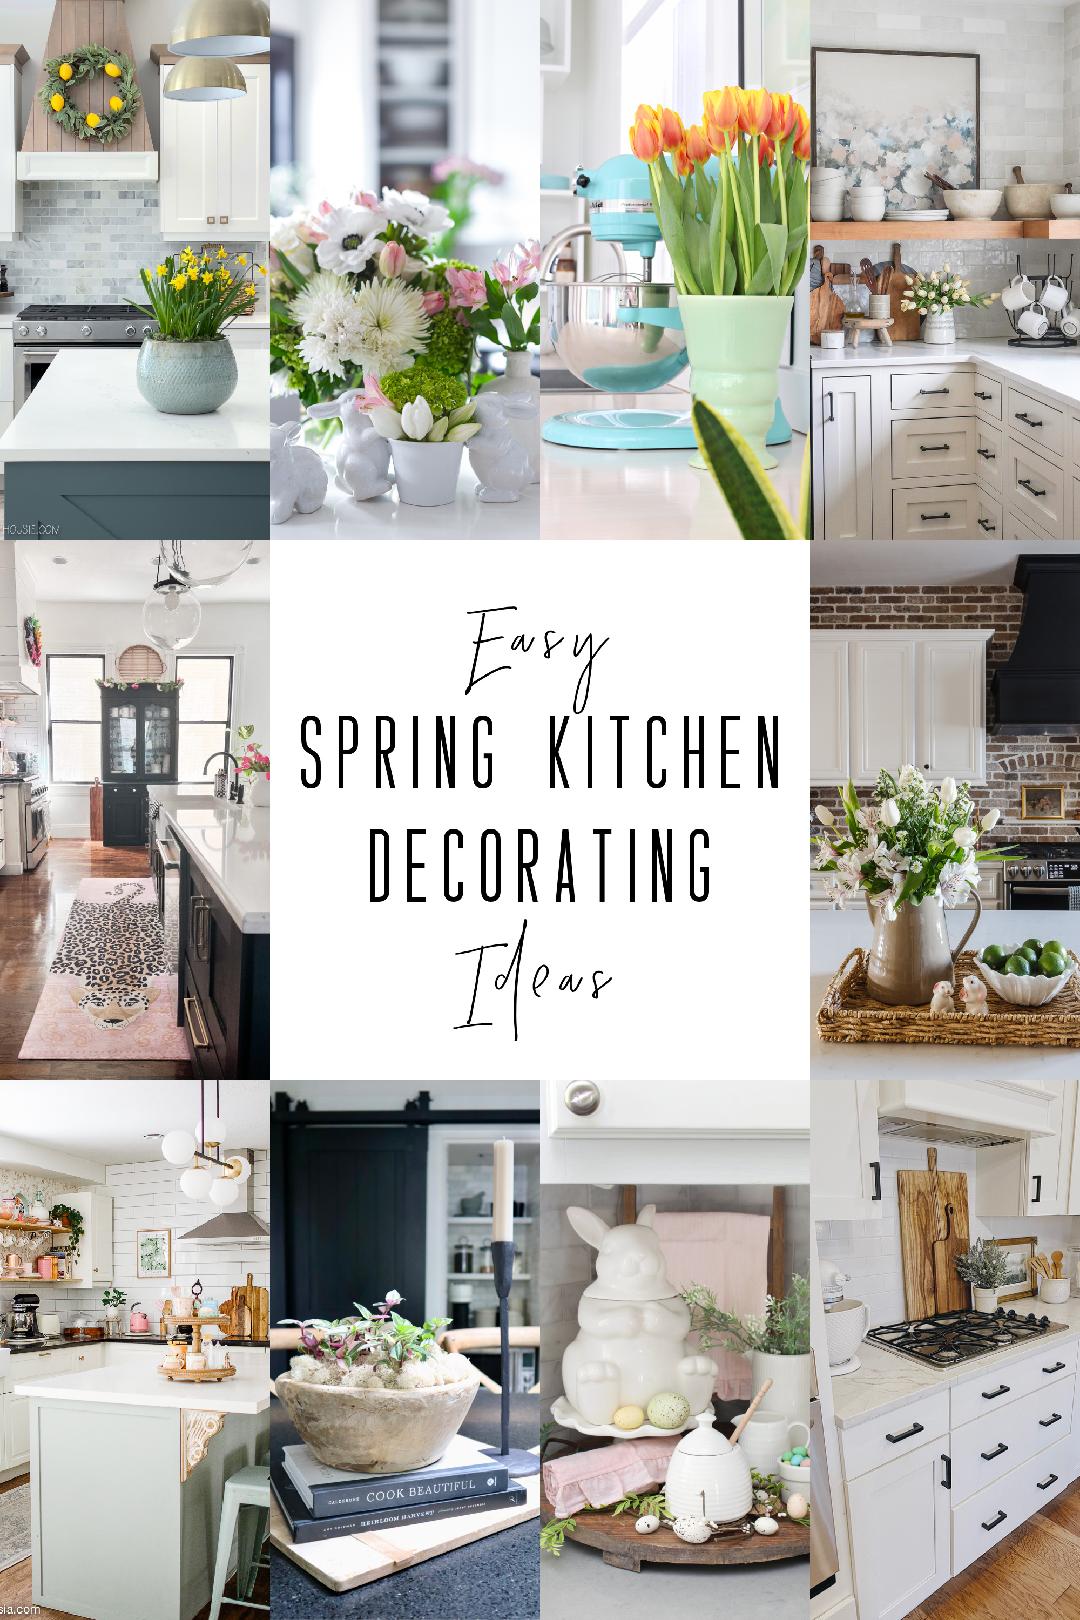 Collage of kitchens decorated for spring.